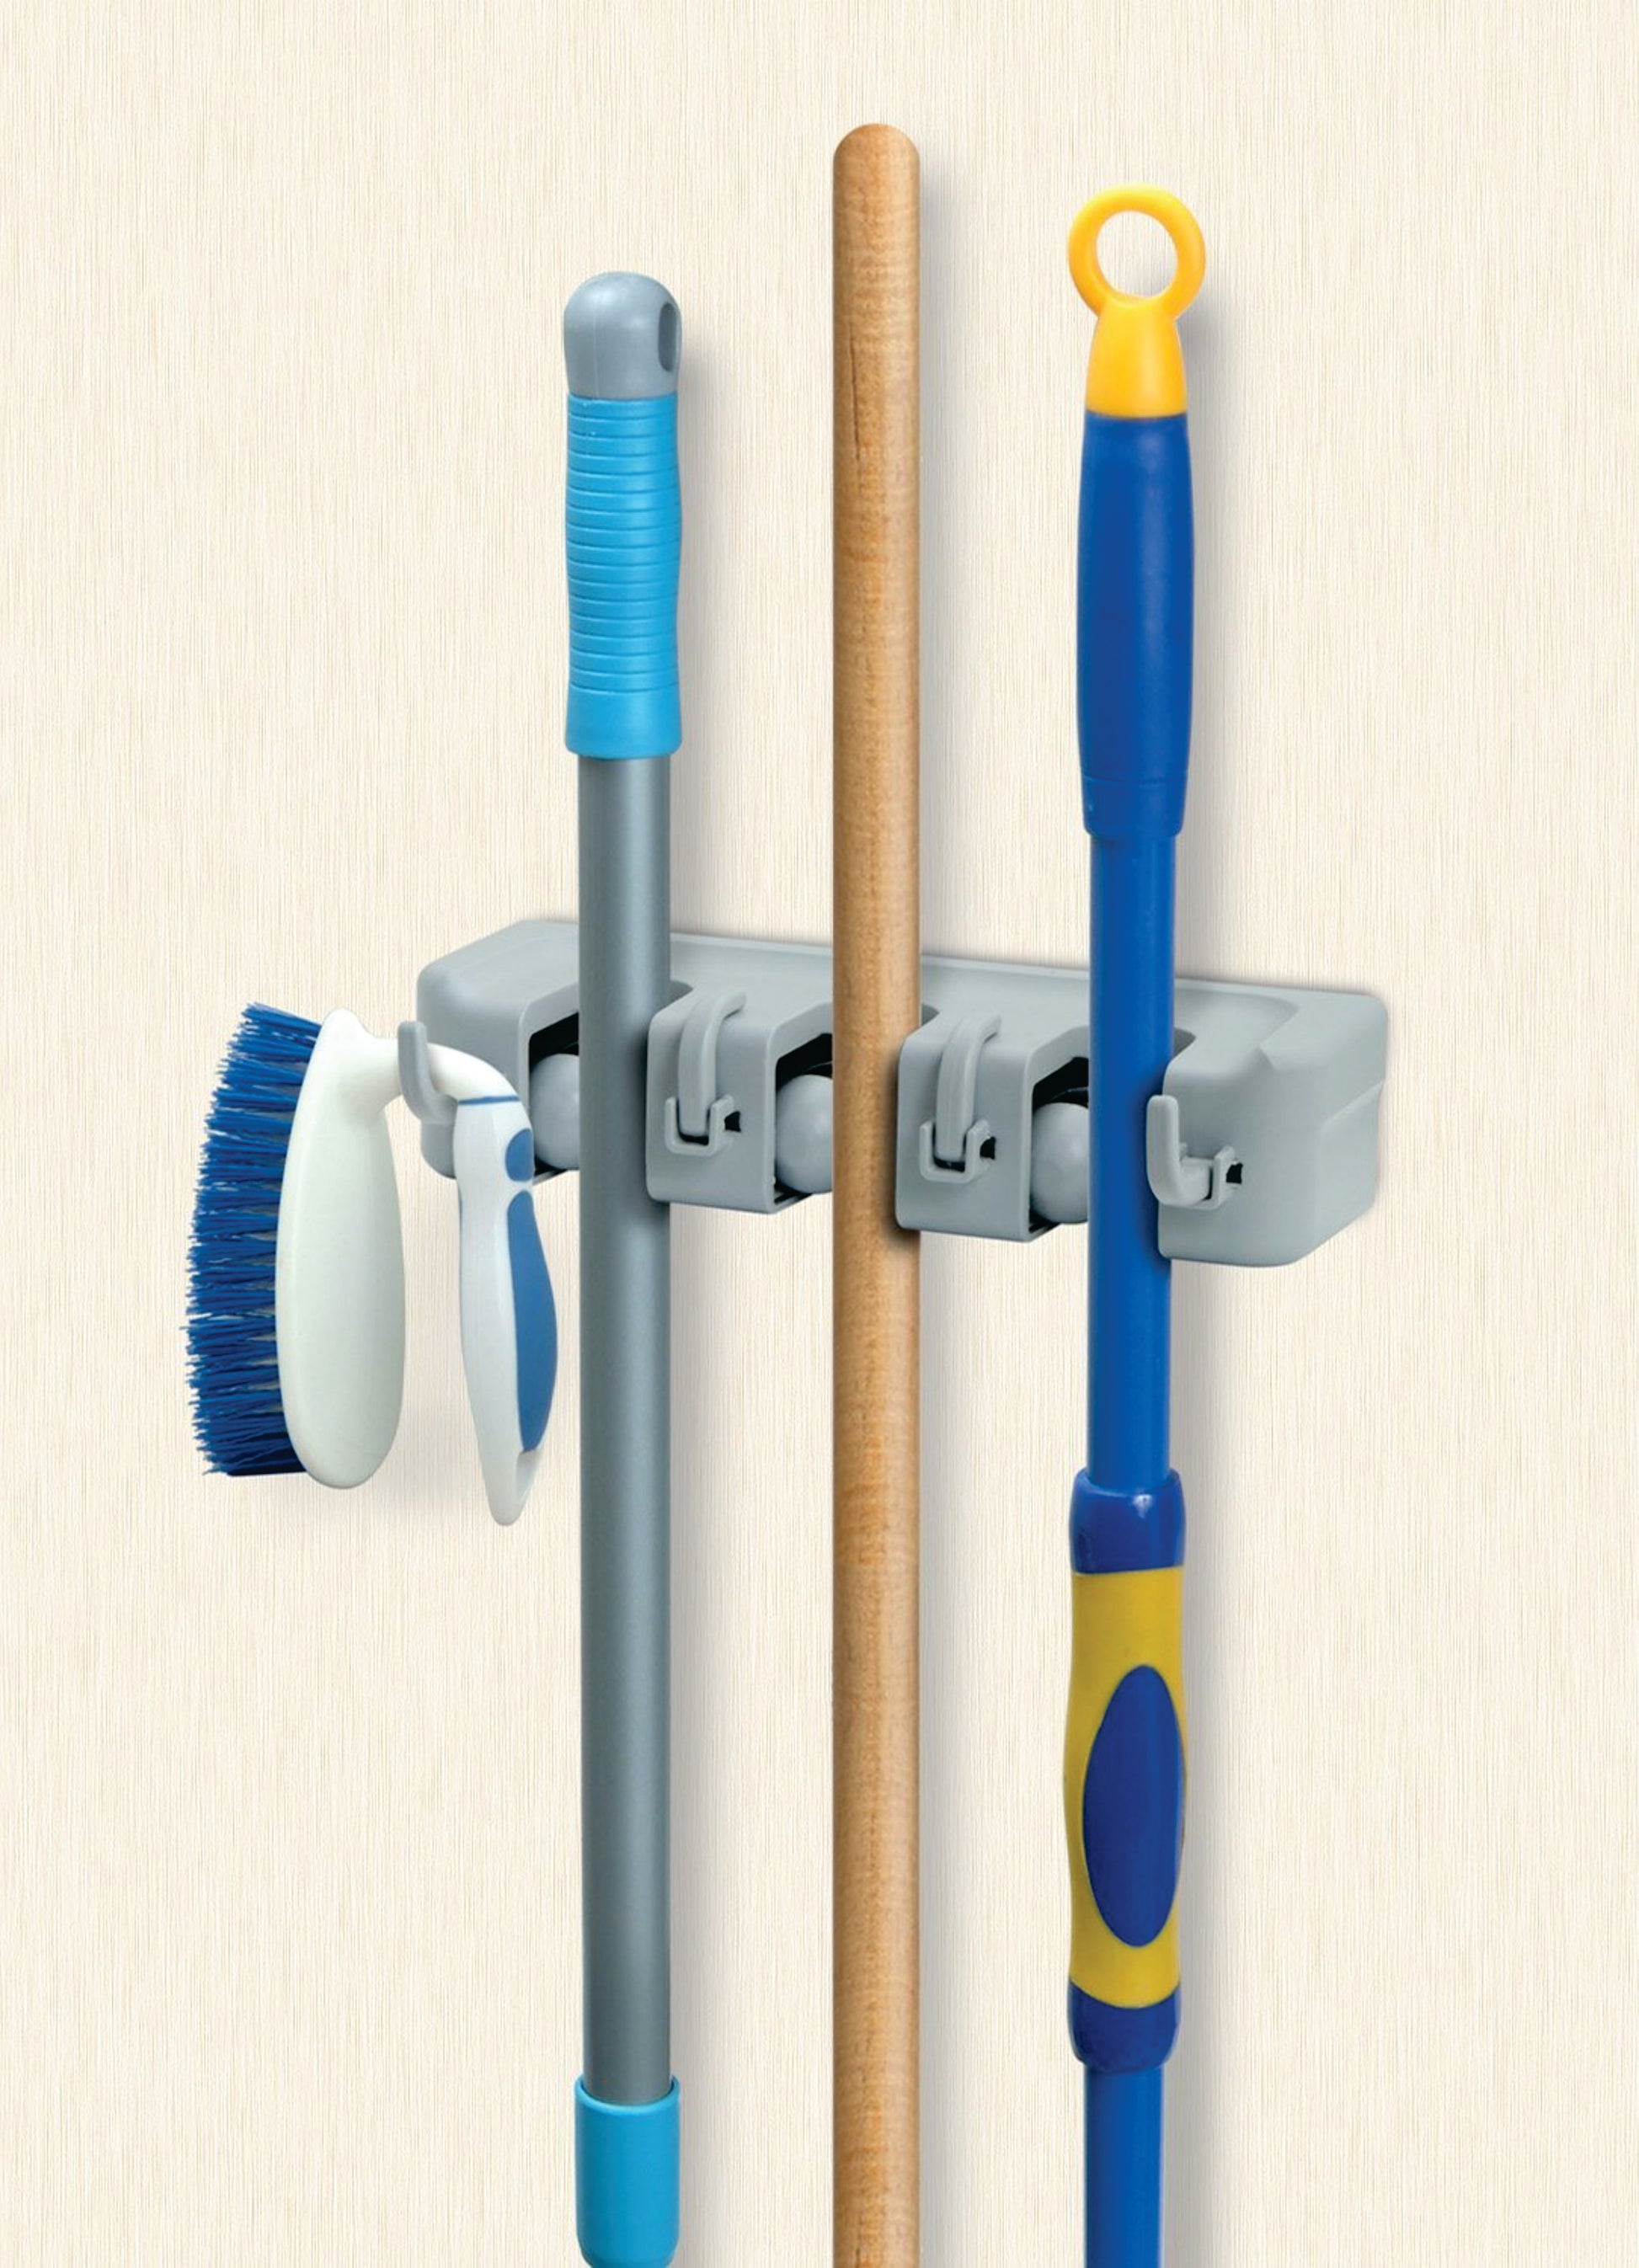 Mop And Broom Holder, Wall Organizer, 3 Slots and 4 Hooks